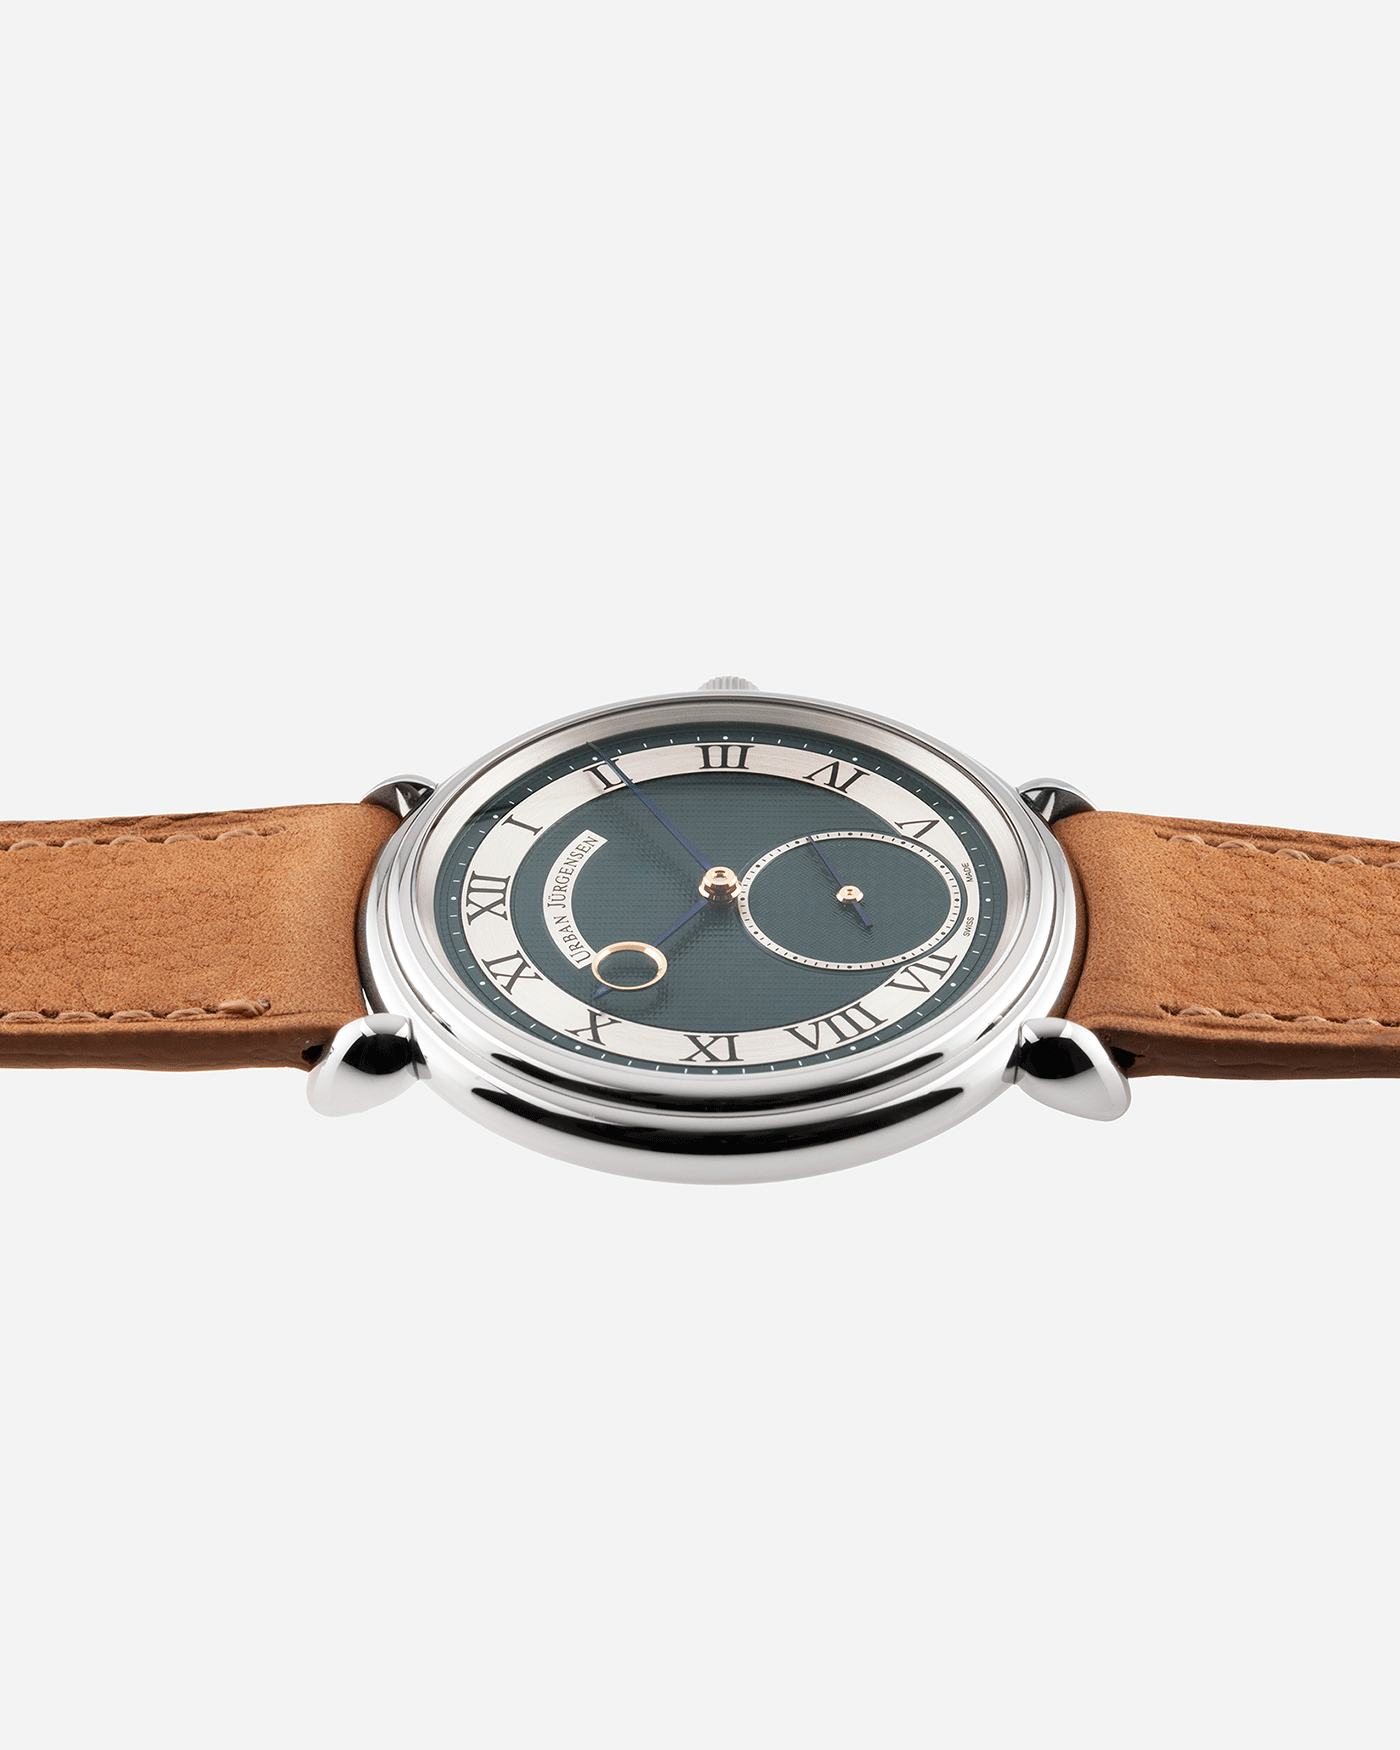 Brand: Urban Jurgensen Year: 2020 Model: Big 8 London Edition Material: Stainless Steel Movement: Frederic Piguet cal. 1160 Case Diameter: 40mm Strap: Chestnut Brown Suede Strap by A Collected Man and Stainless Steel Urban Jurgensen Tang Buckle